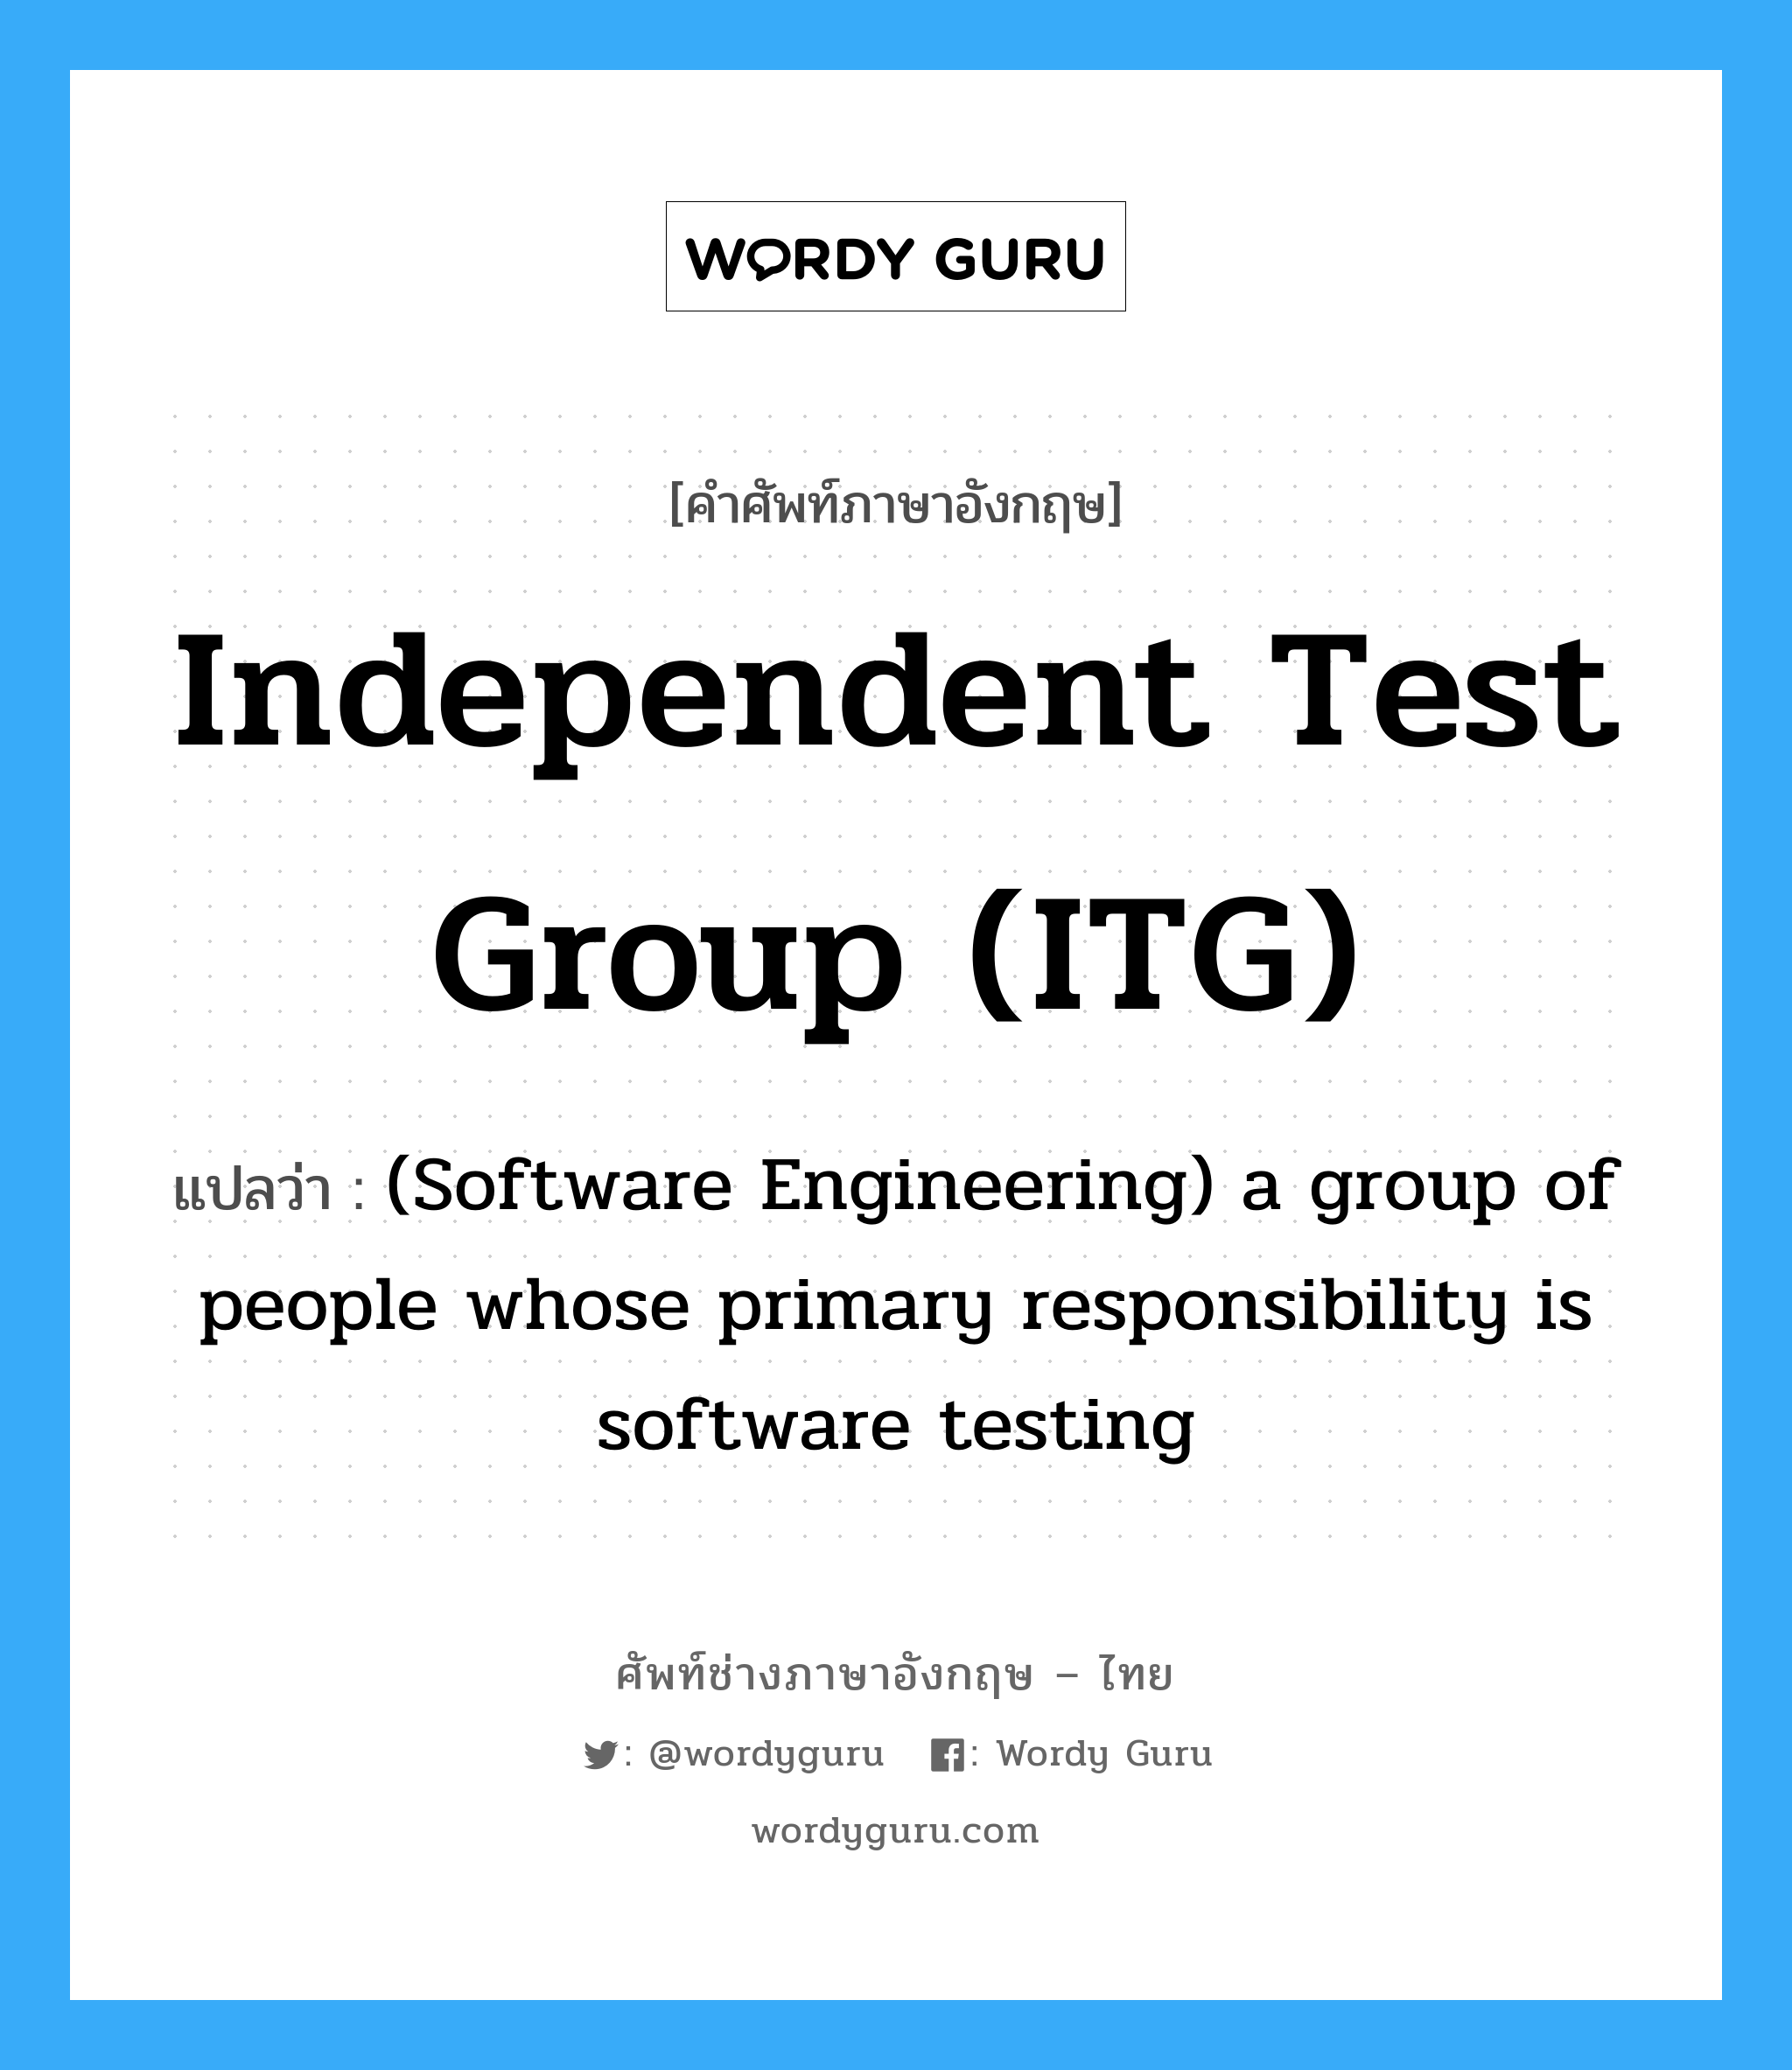 (Software Engineering) a group of people whose primary responsibility is software testing ภาษาอังกฤษ?, คำศัพท์ช่างภาษาอังกฤษ - ไทย (Software Engineering) a group of people whose primary responsibility is software testing คำศัพท์ภาษาอังกฤษ (Software Engineering) a group of people whose primary responsibility is software testing แปลว่า Independent test group (ITG)